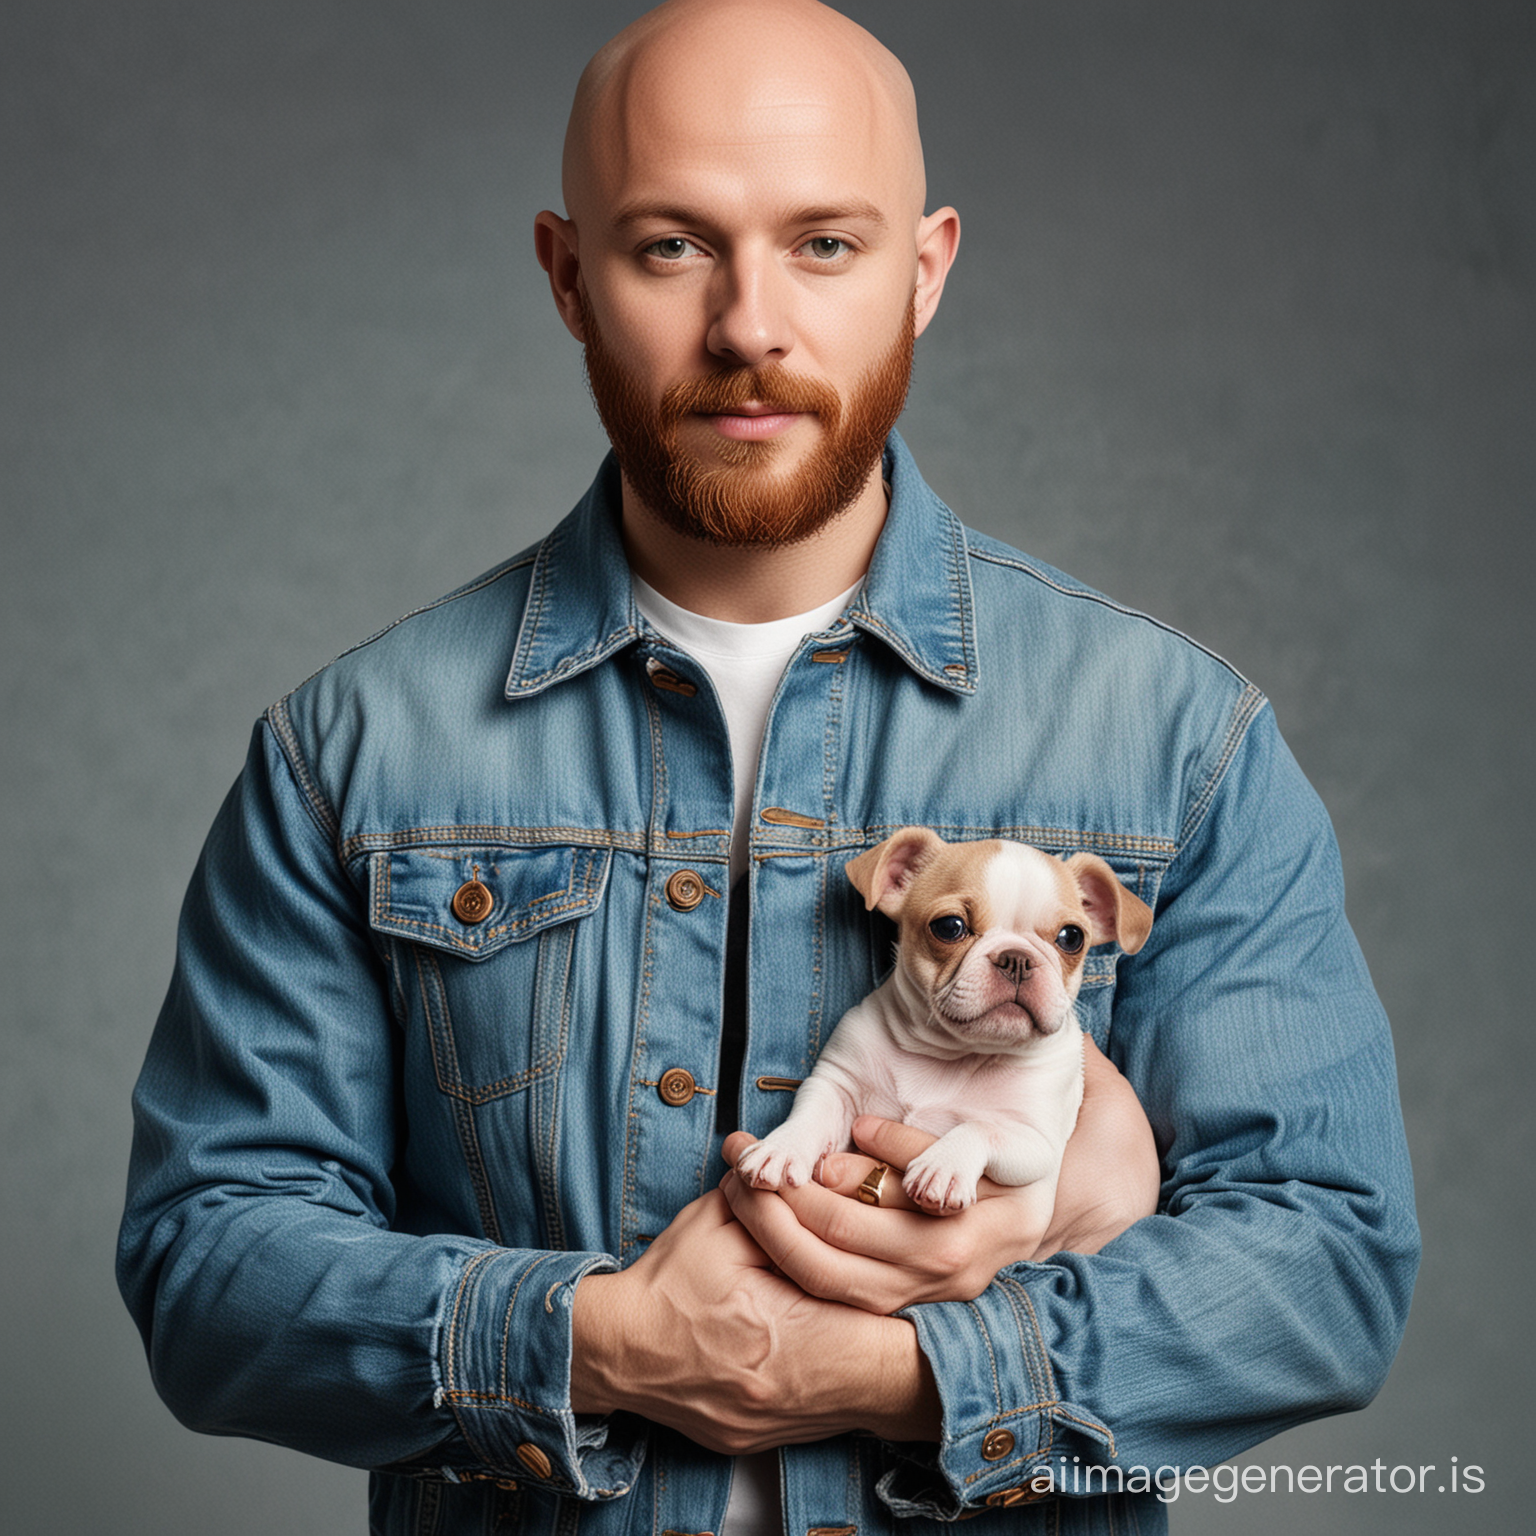 Bald man with short beard and denim jacket holding a small puppy